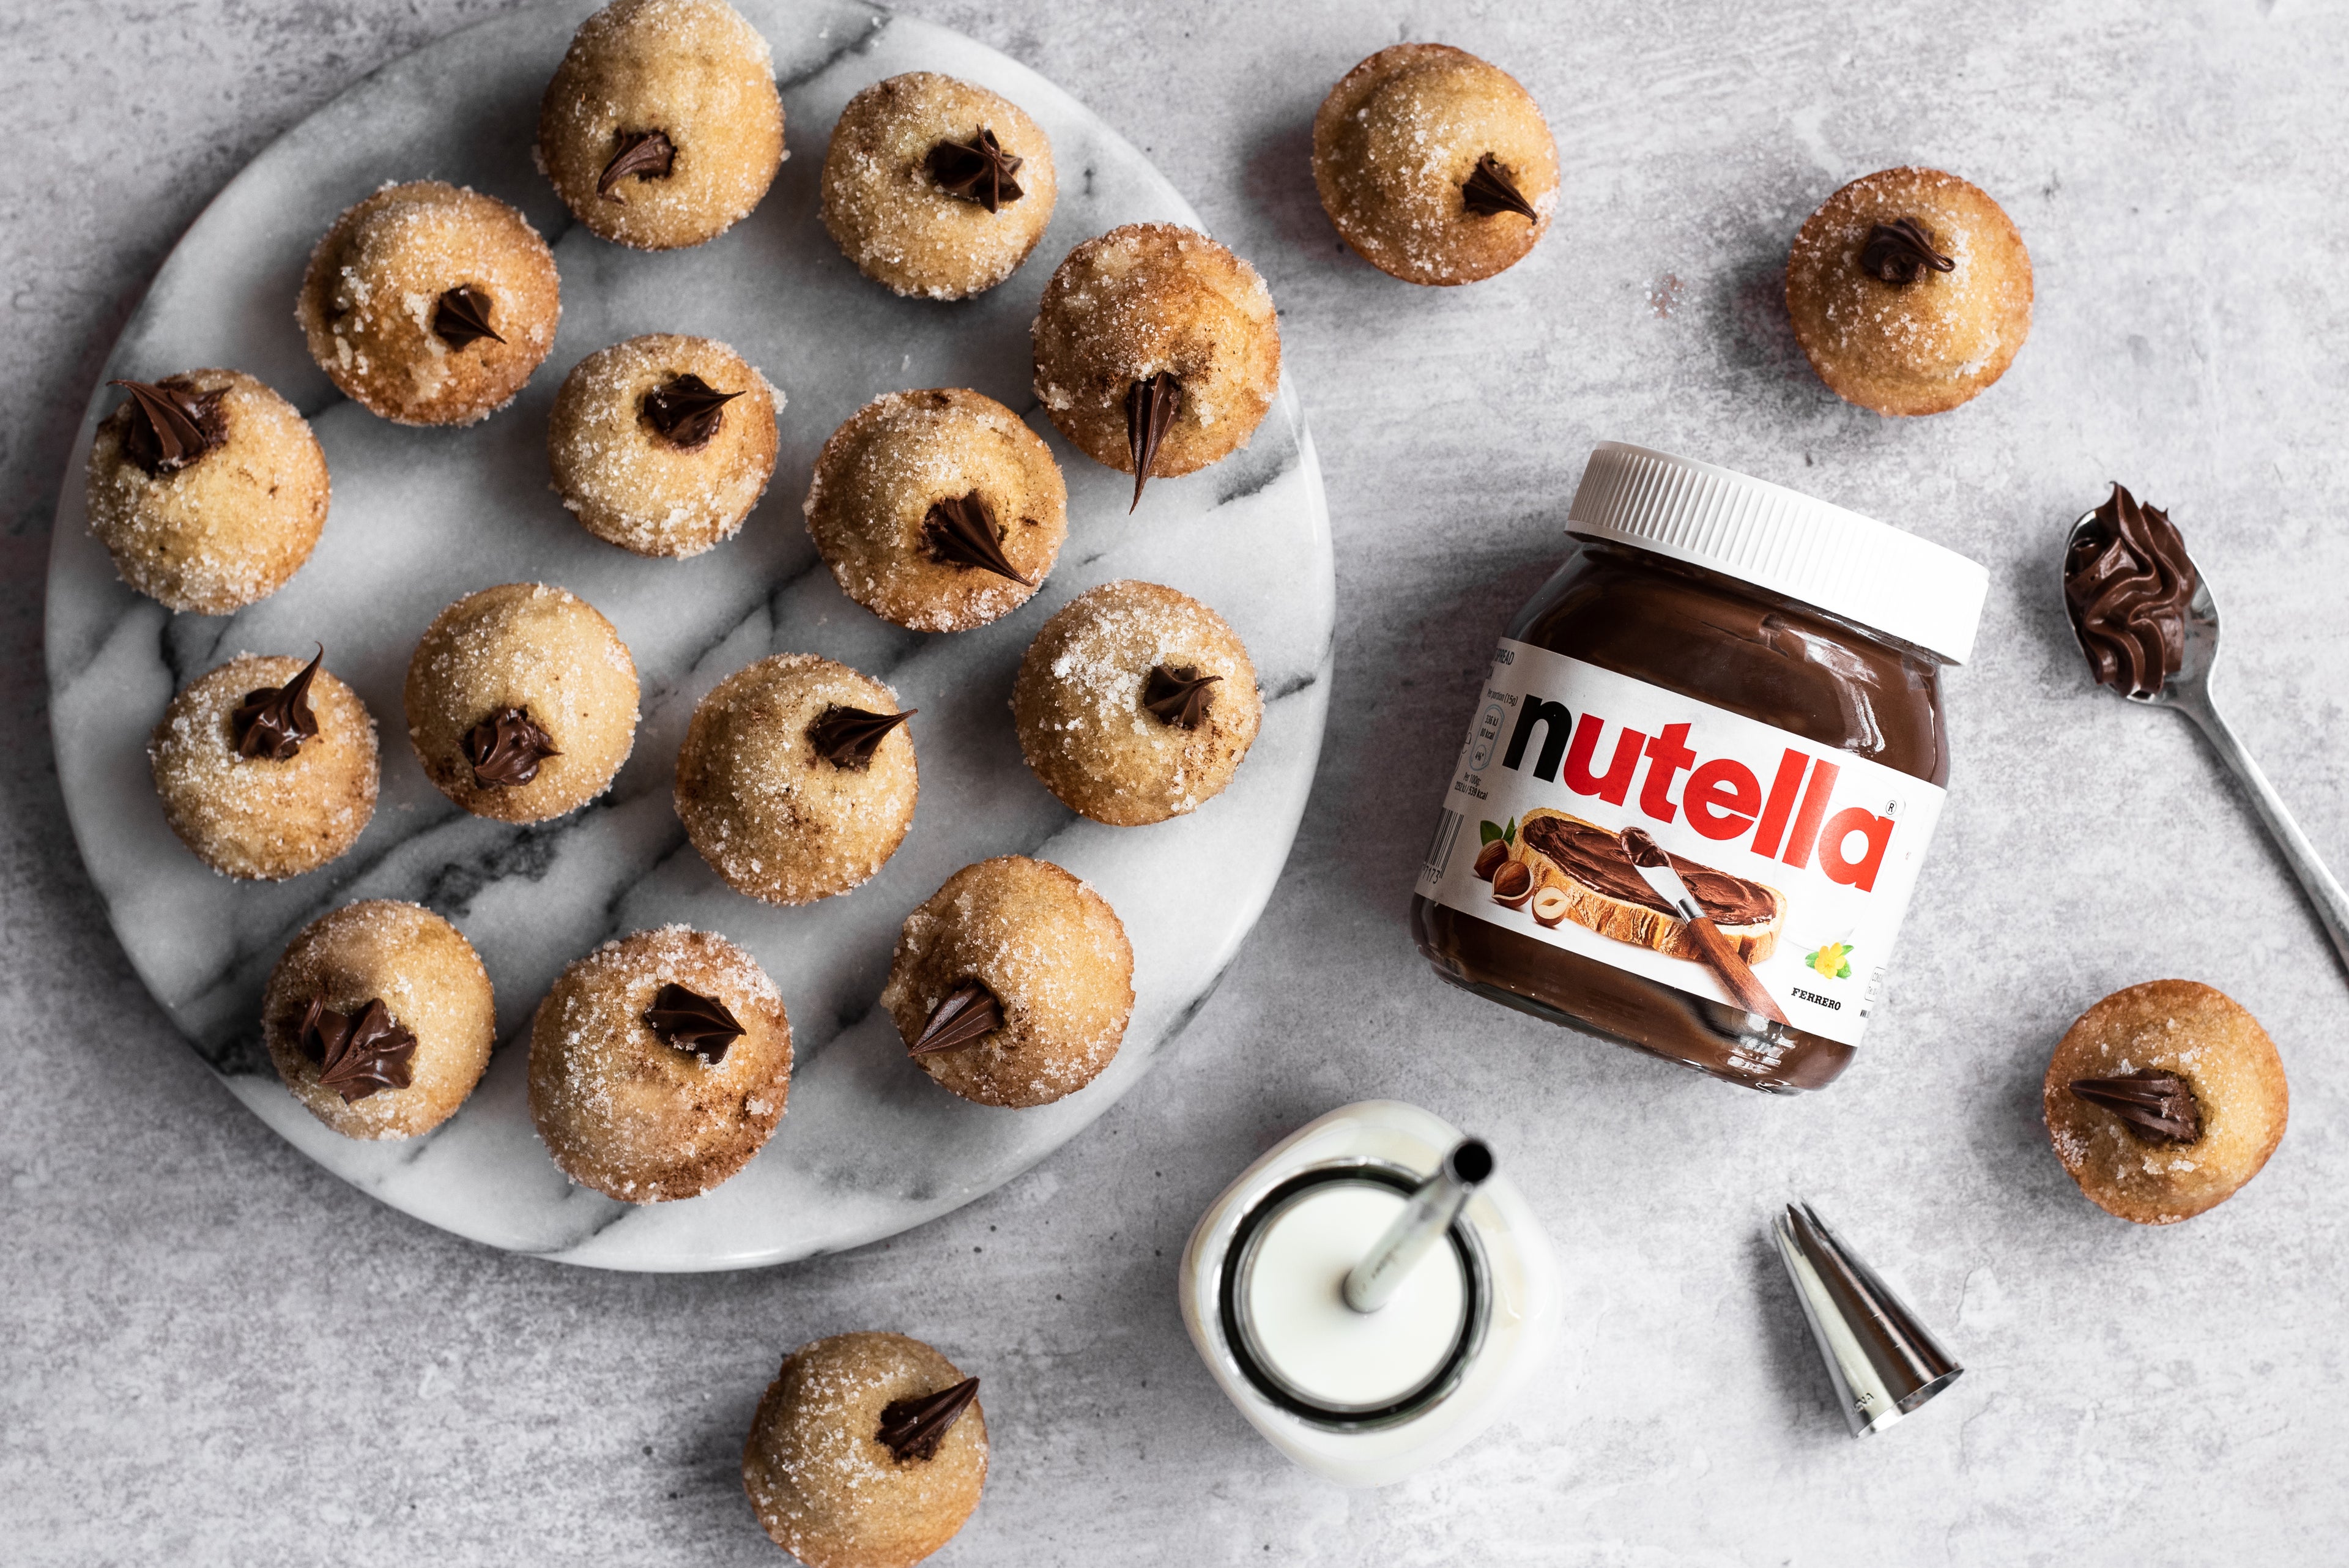 Plate of Nutella filled doughnuts next to a jar of Nutella